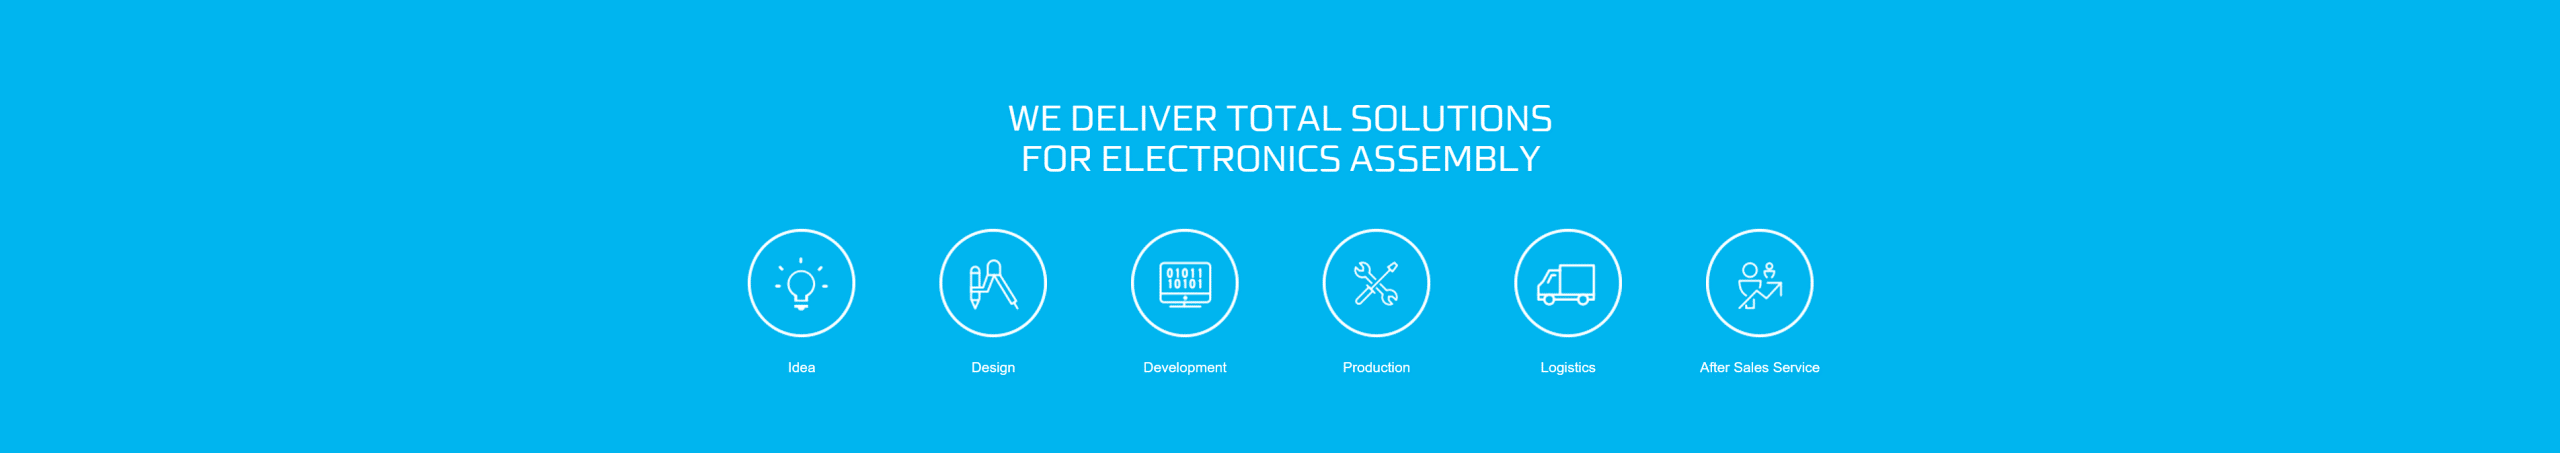 Electronic assembly solutions